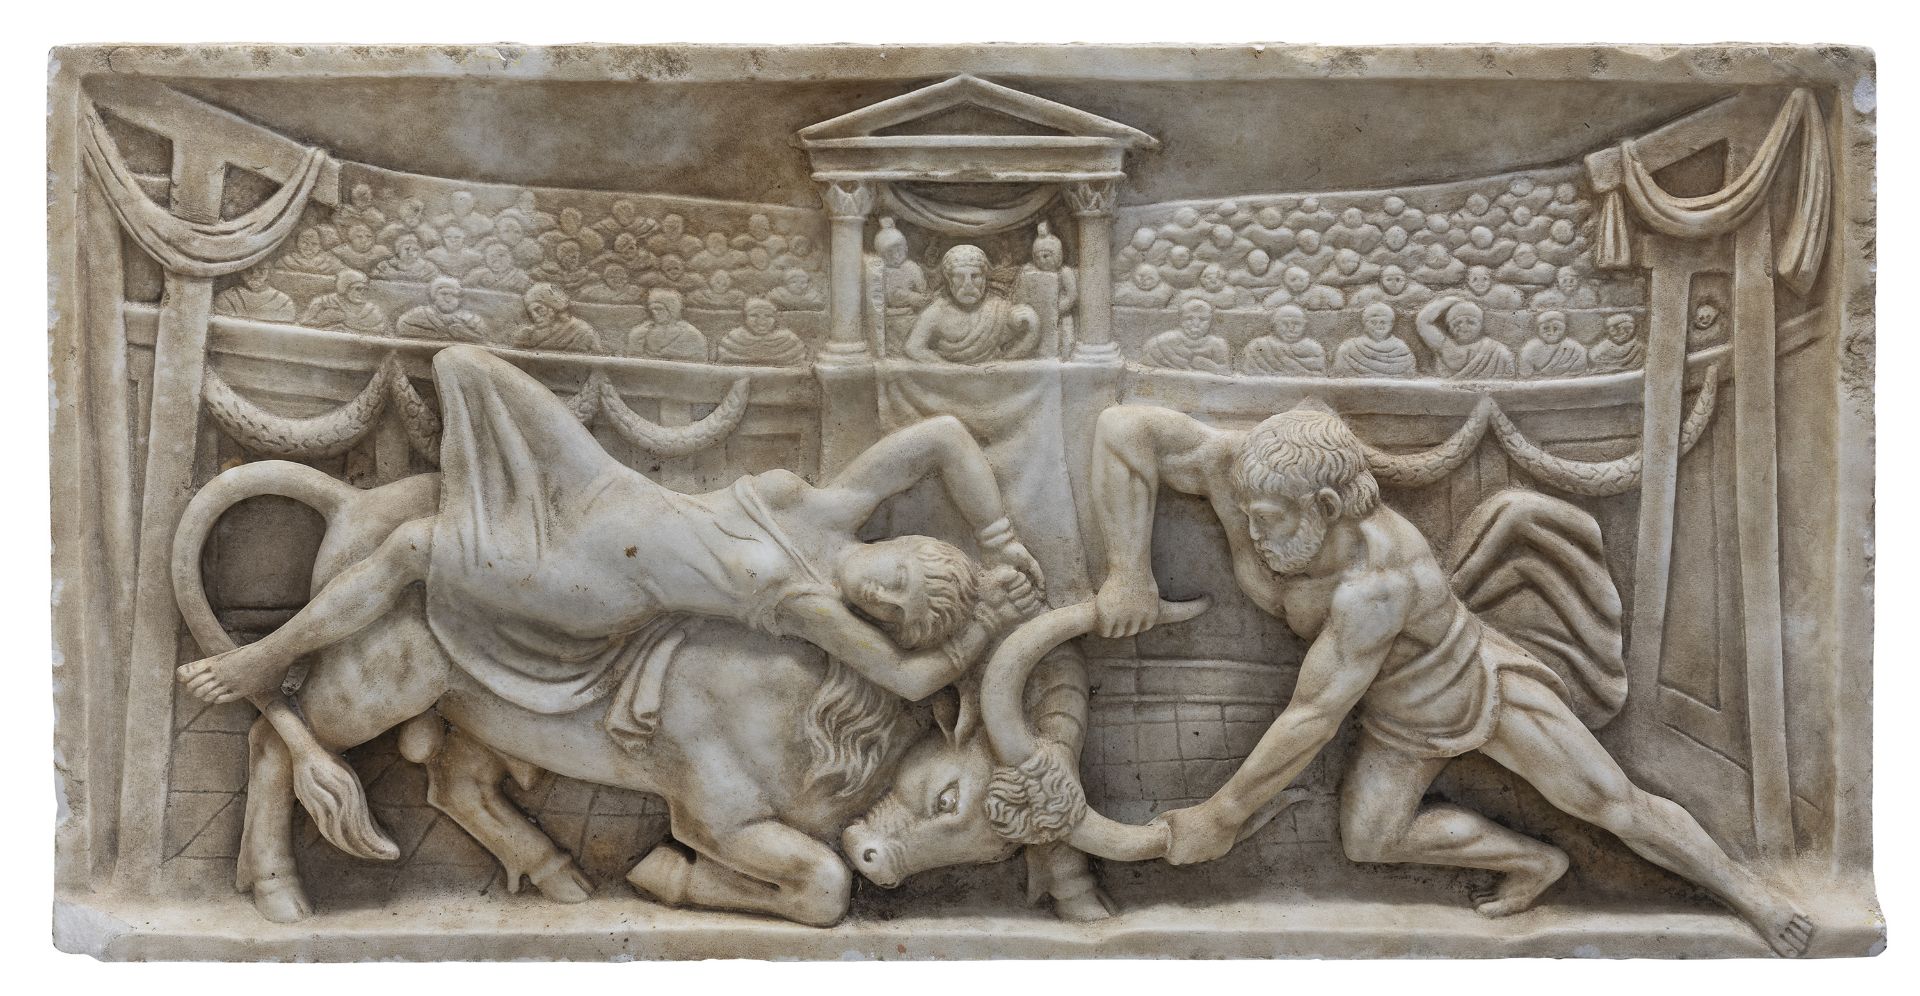 BAS-RELIEF IN WHITE MARBLE ROMAN STYLE END OF THE 19TH CENTURY